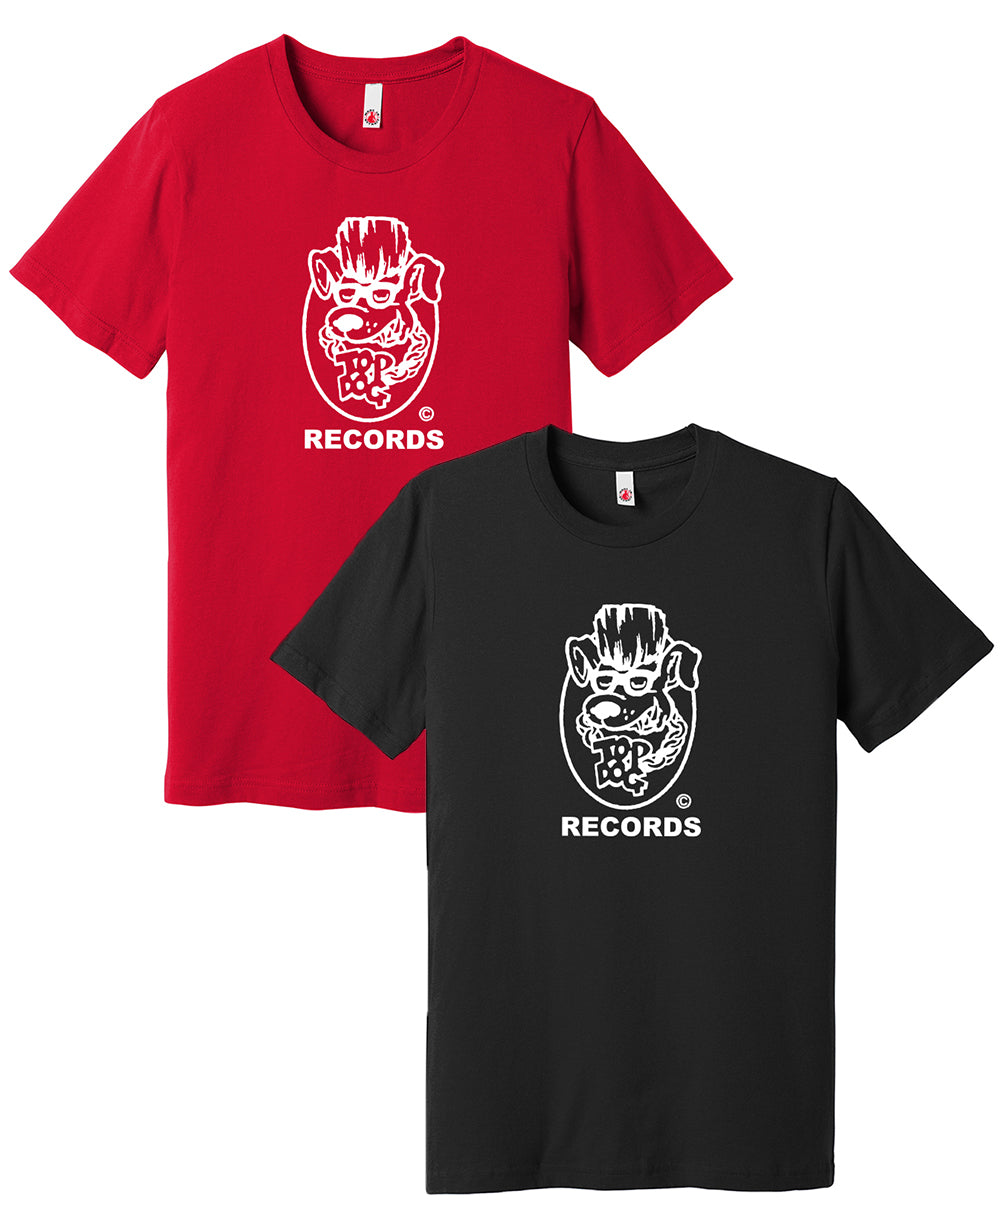 Top Dog Records Tee